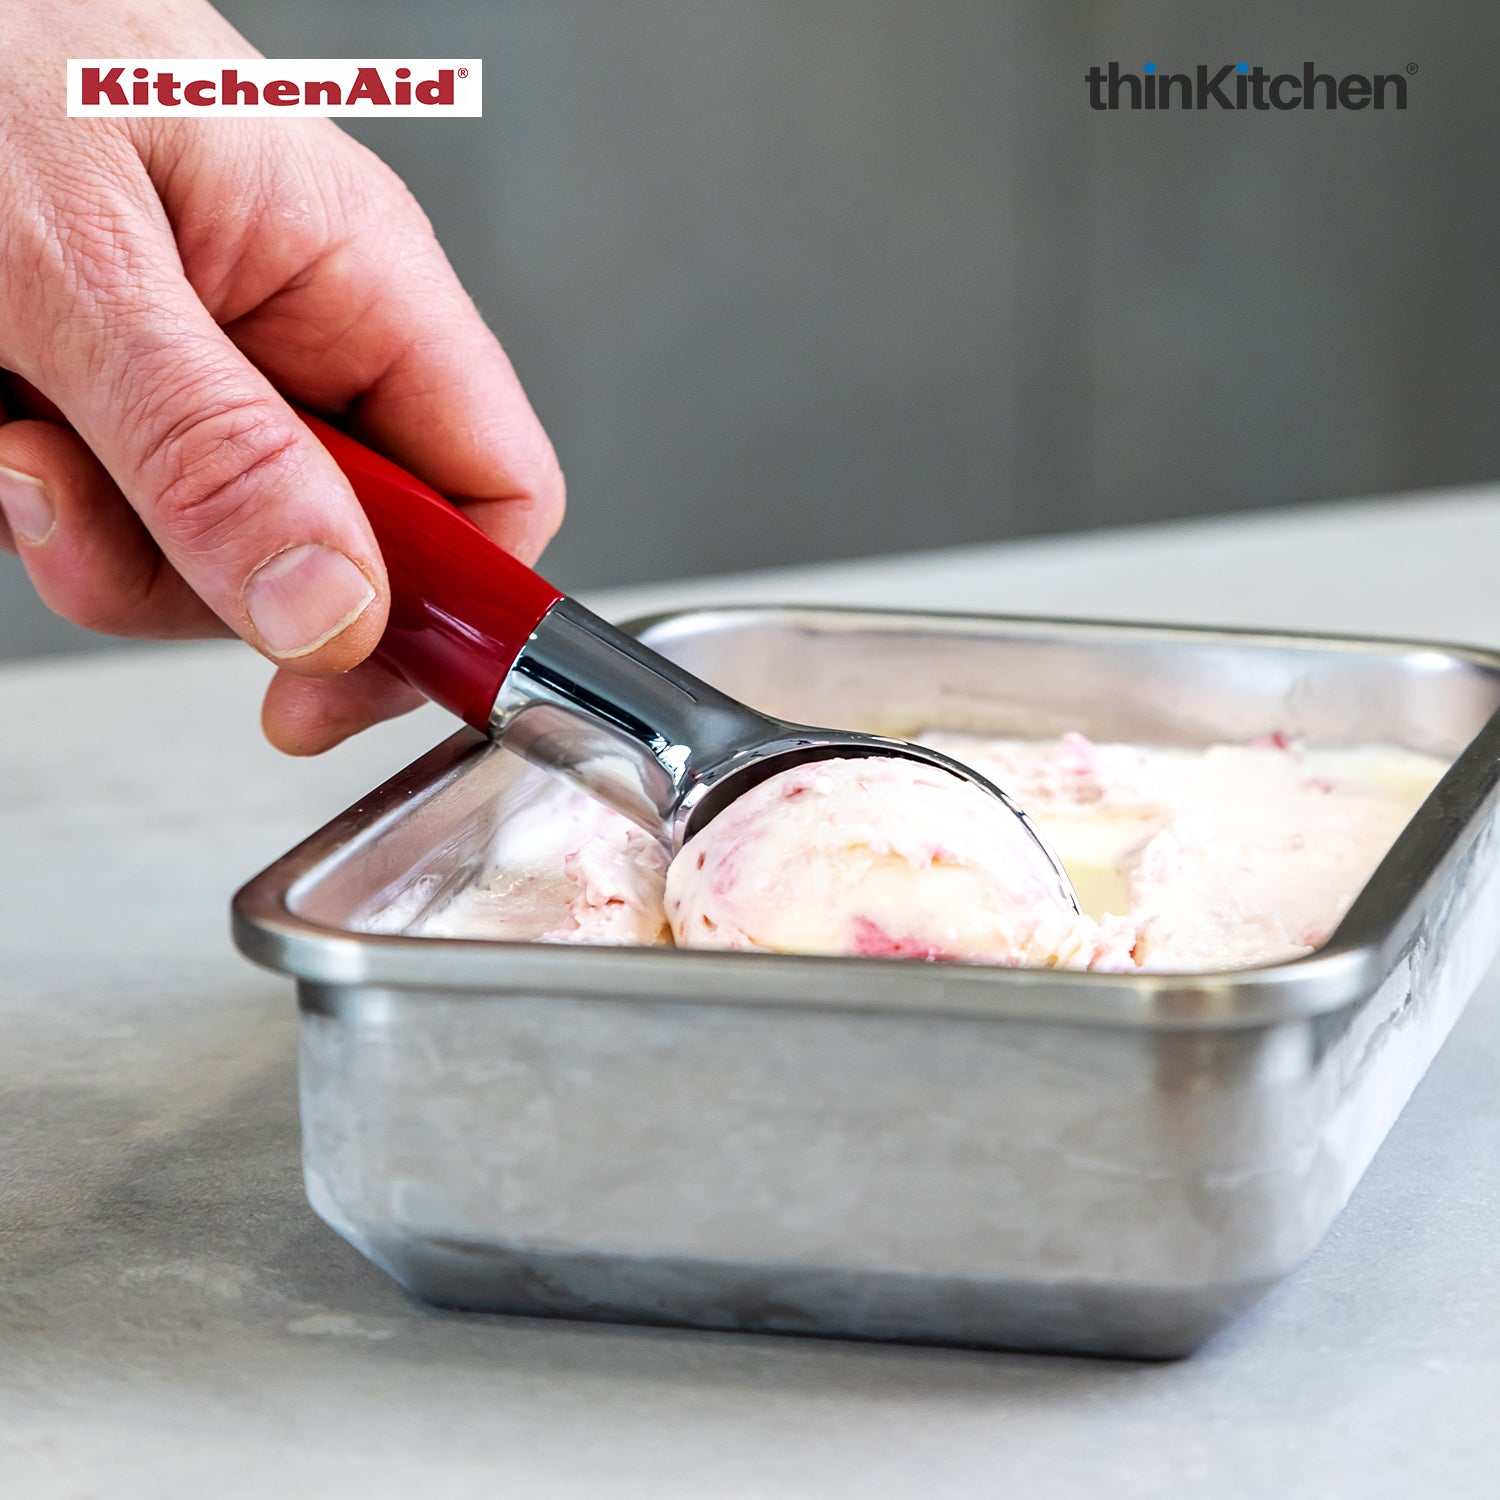 KitchenAid's Popular Ice Cream Scoop Lets You Serve Dessert With Ease